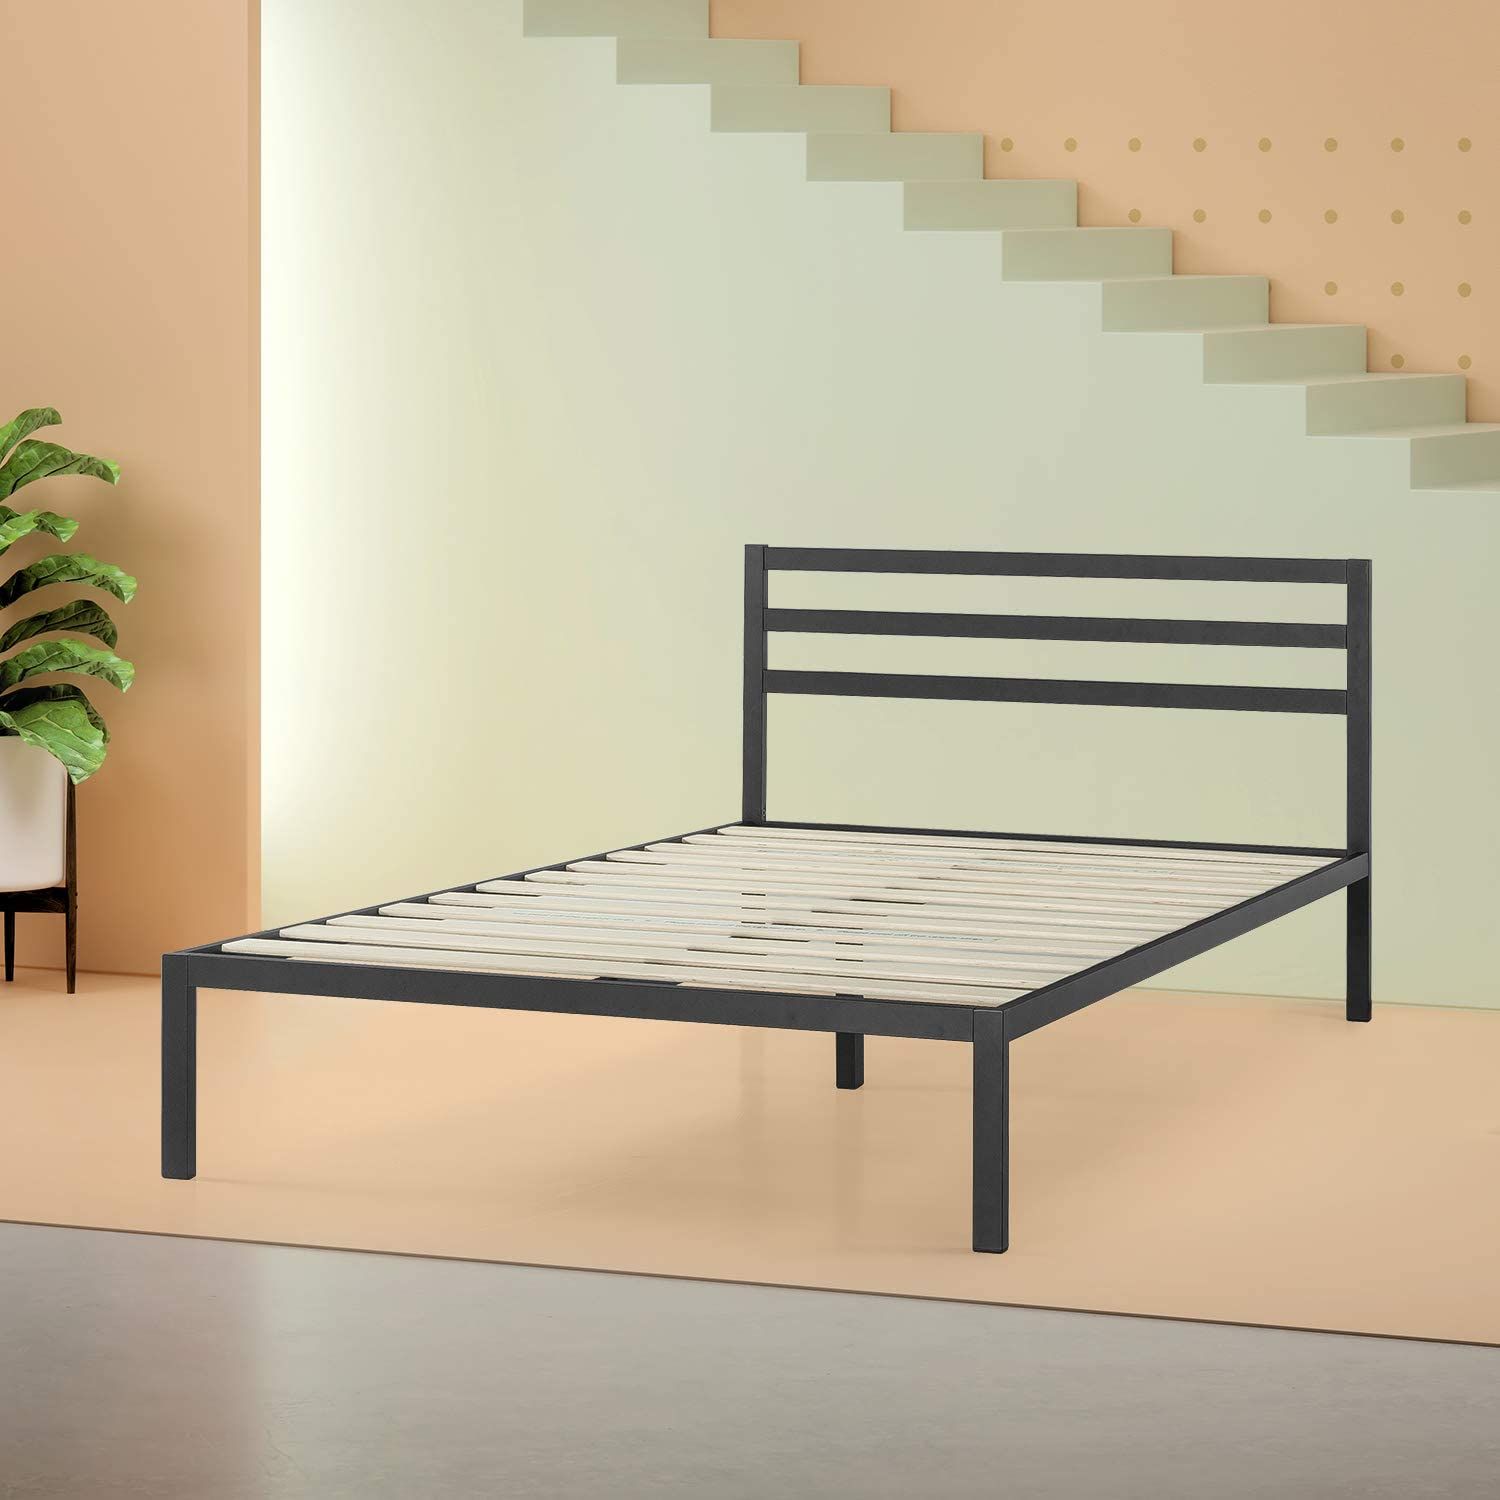 19 Best Metal Bed Frames 2020 The, Fashion Bed Group Metal Frame Instructions